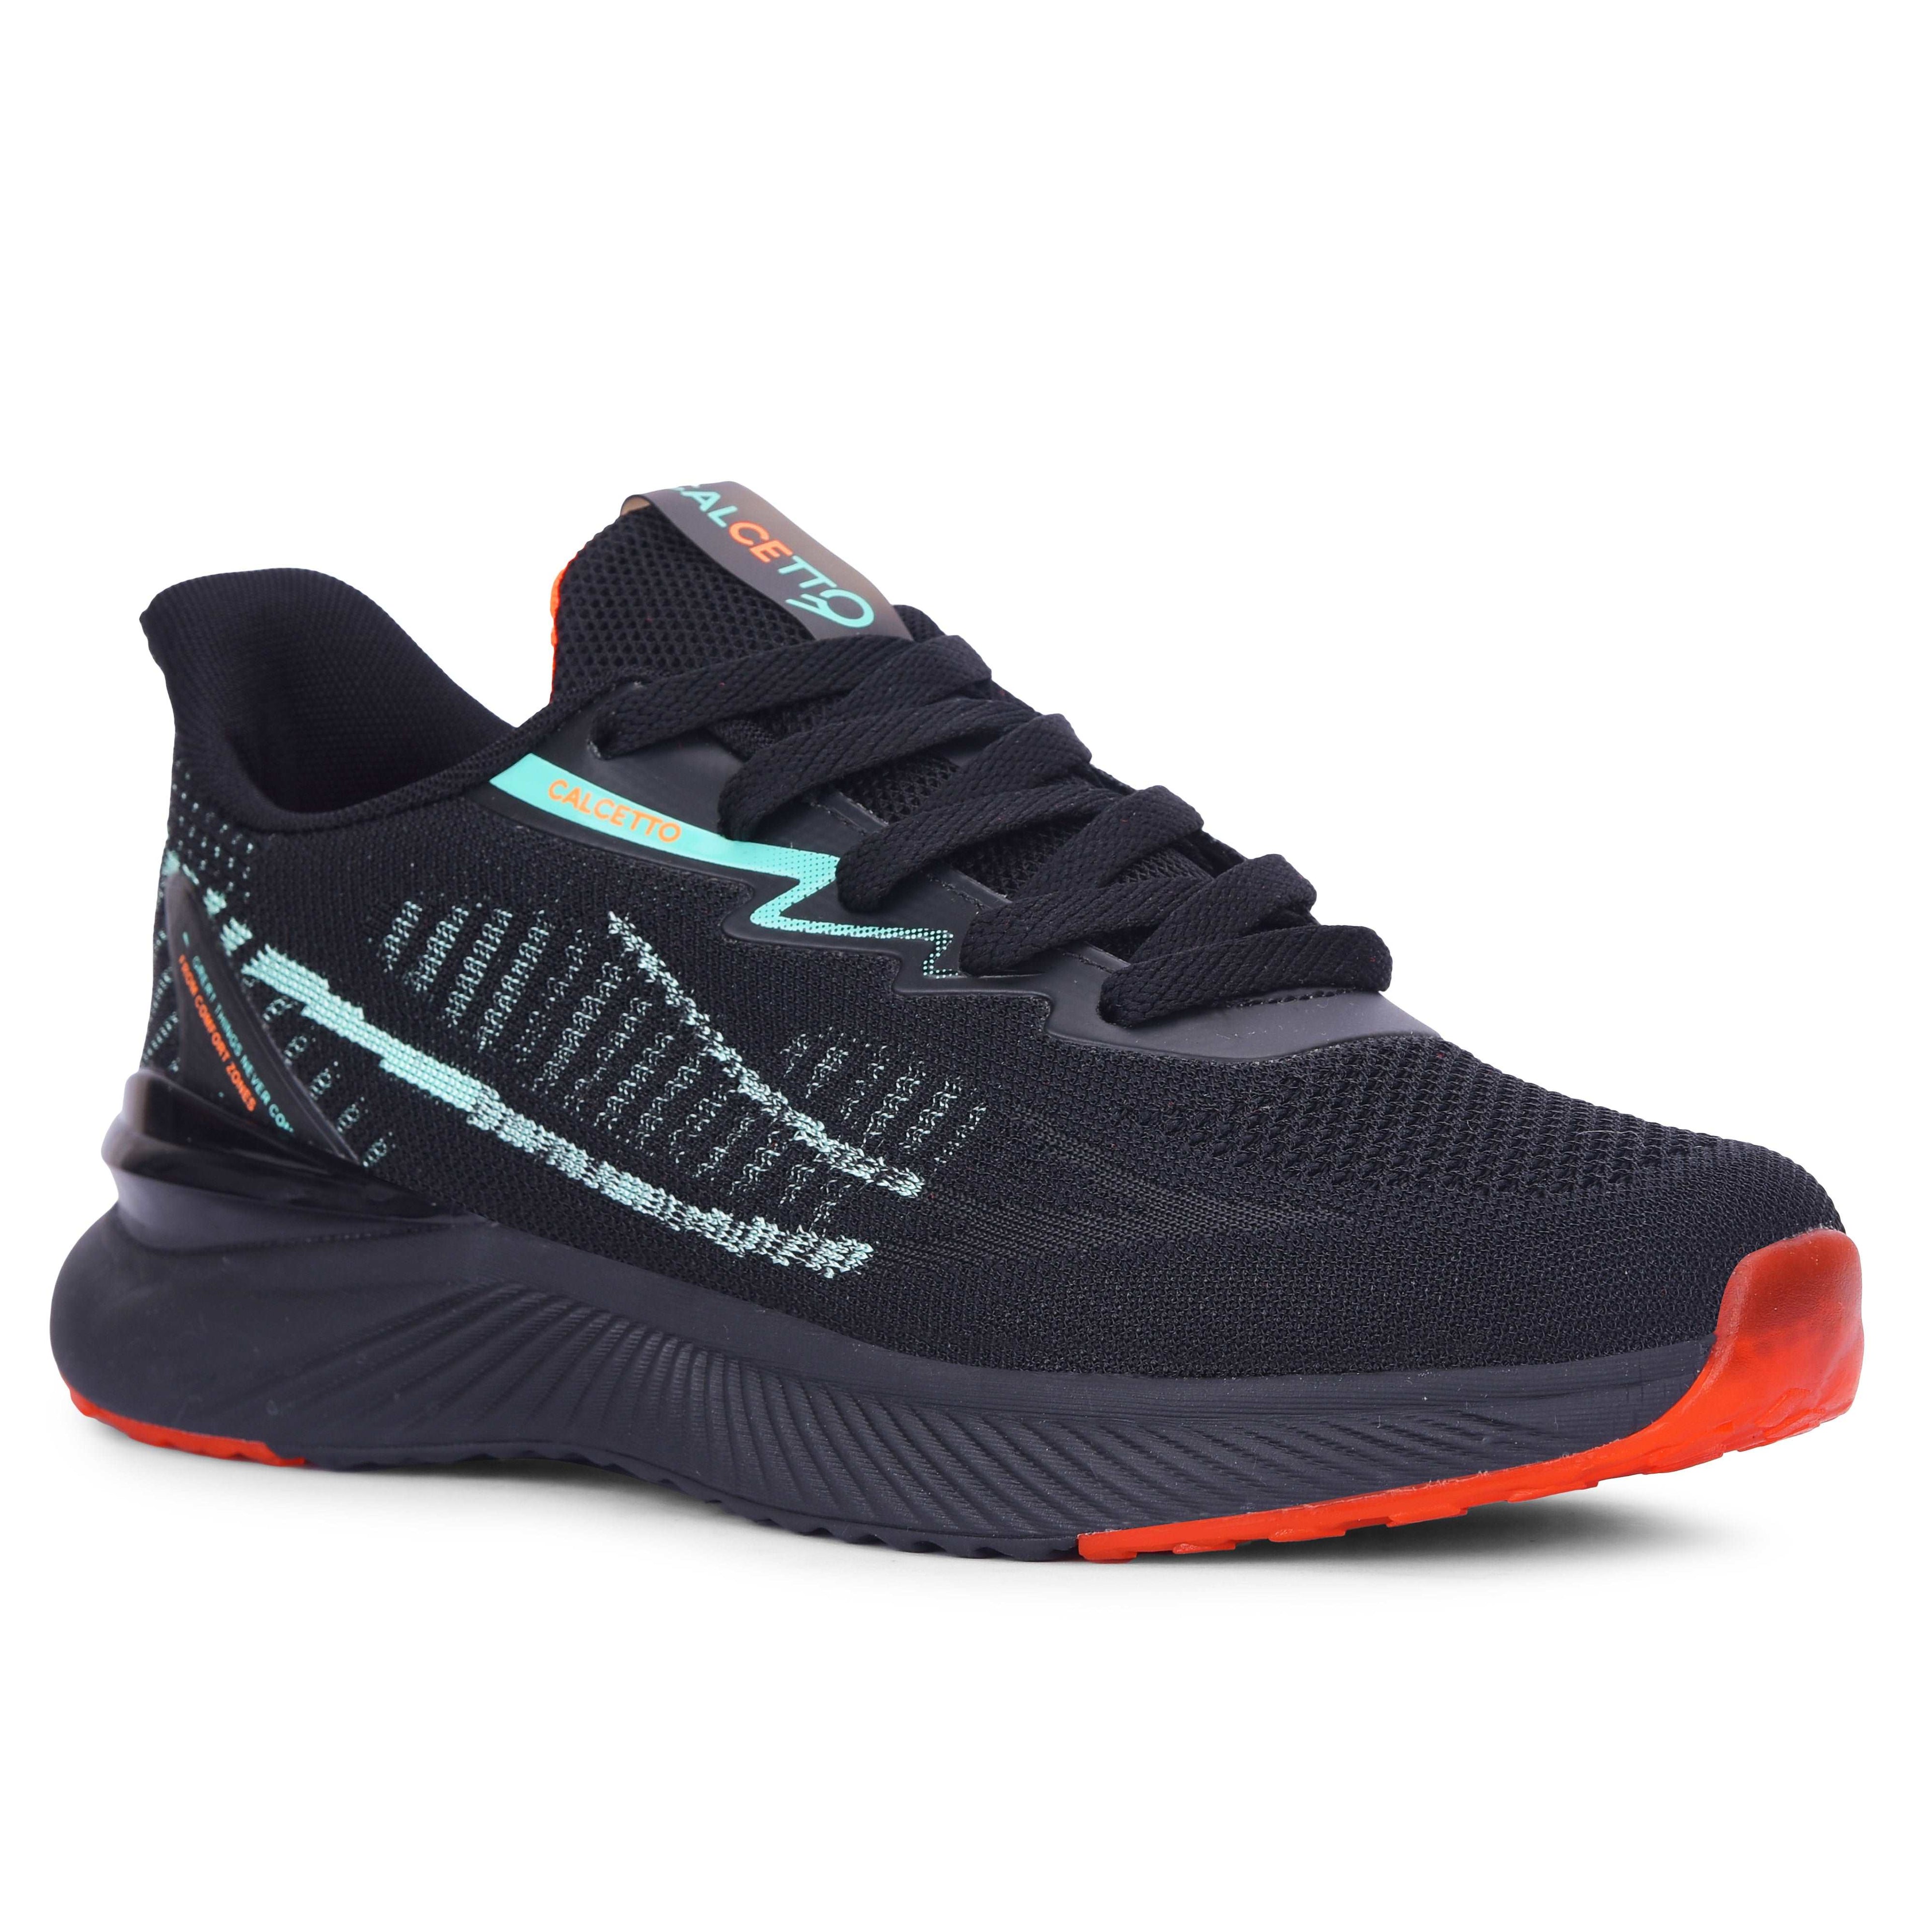 Calcetto CLT-0987 Black Green Running Sports Shoe For Men